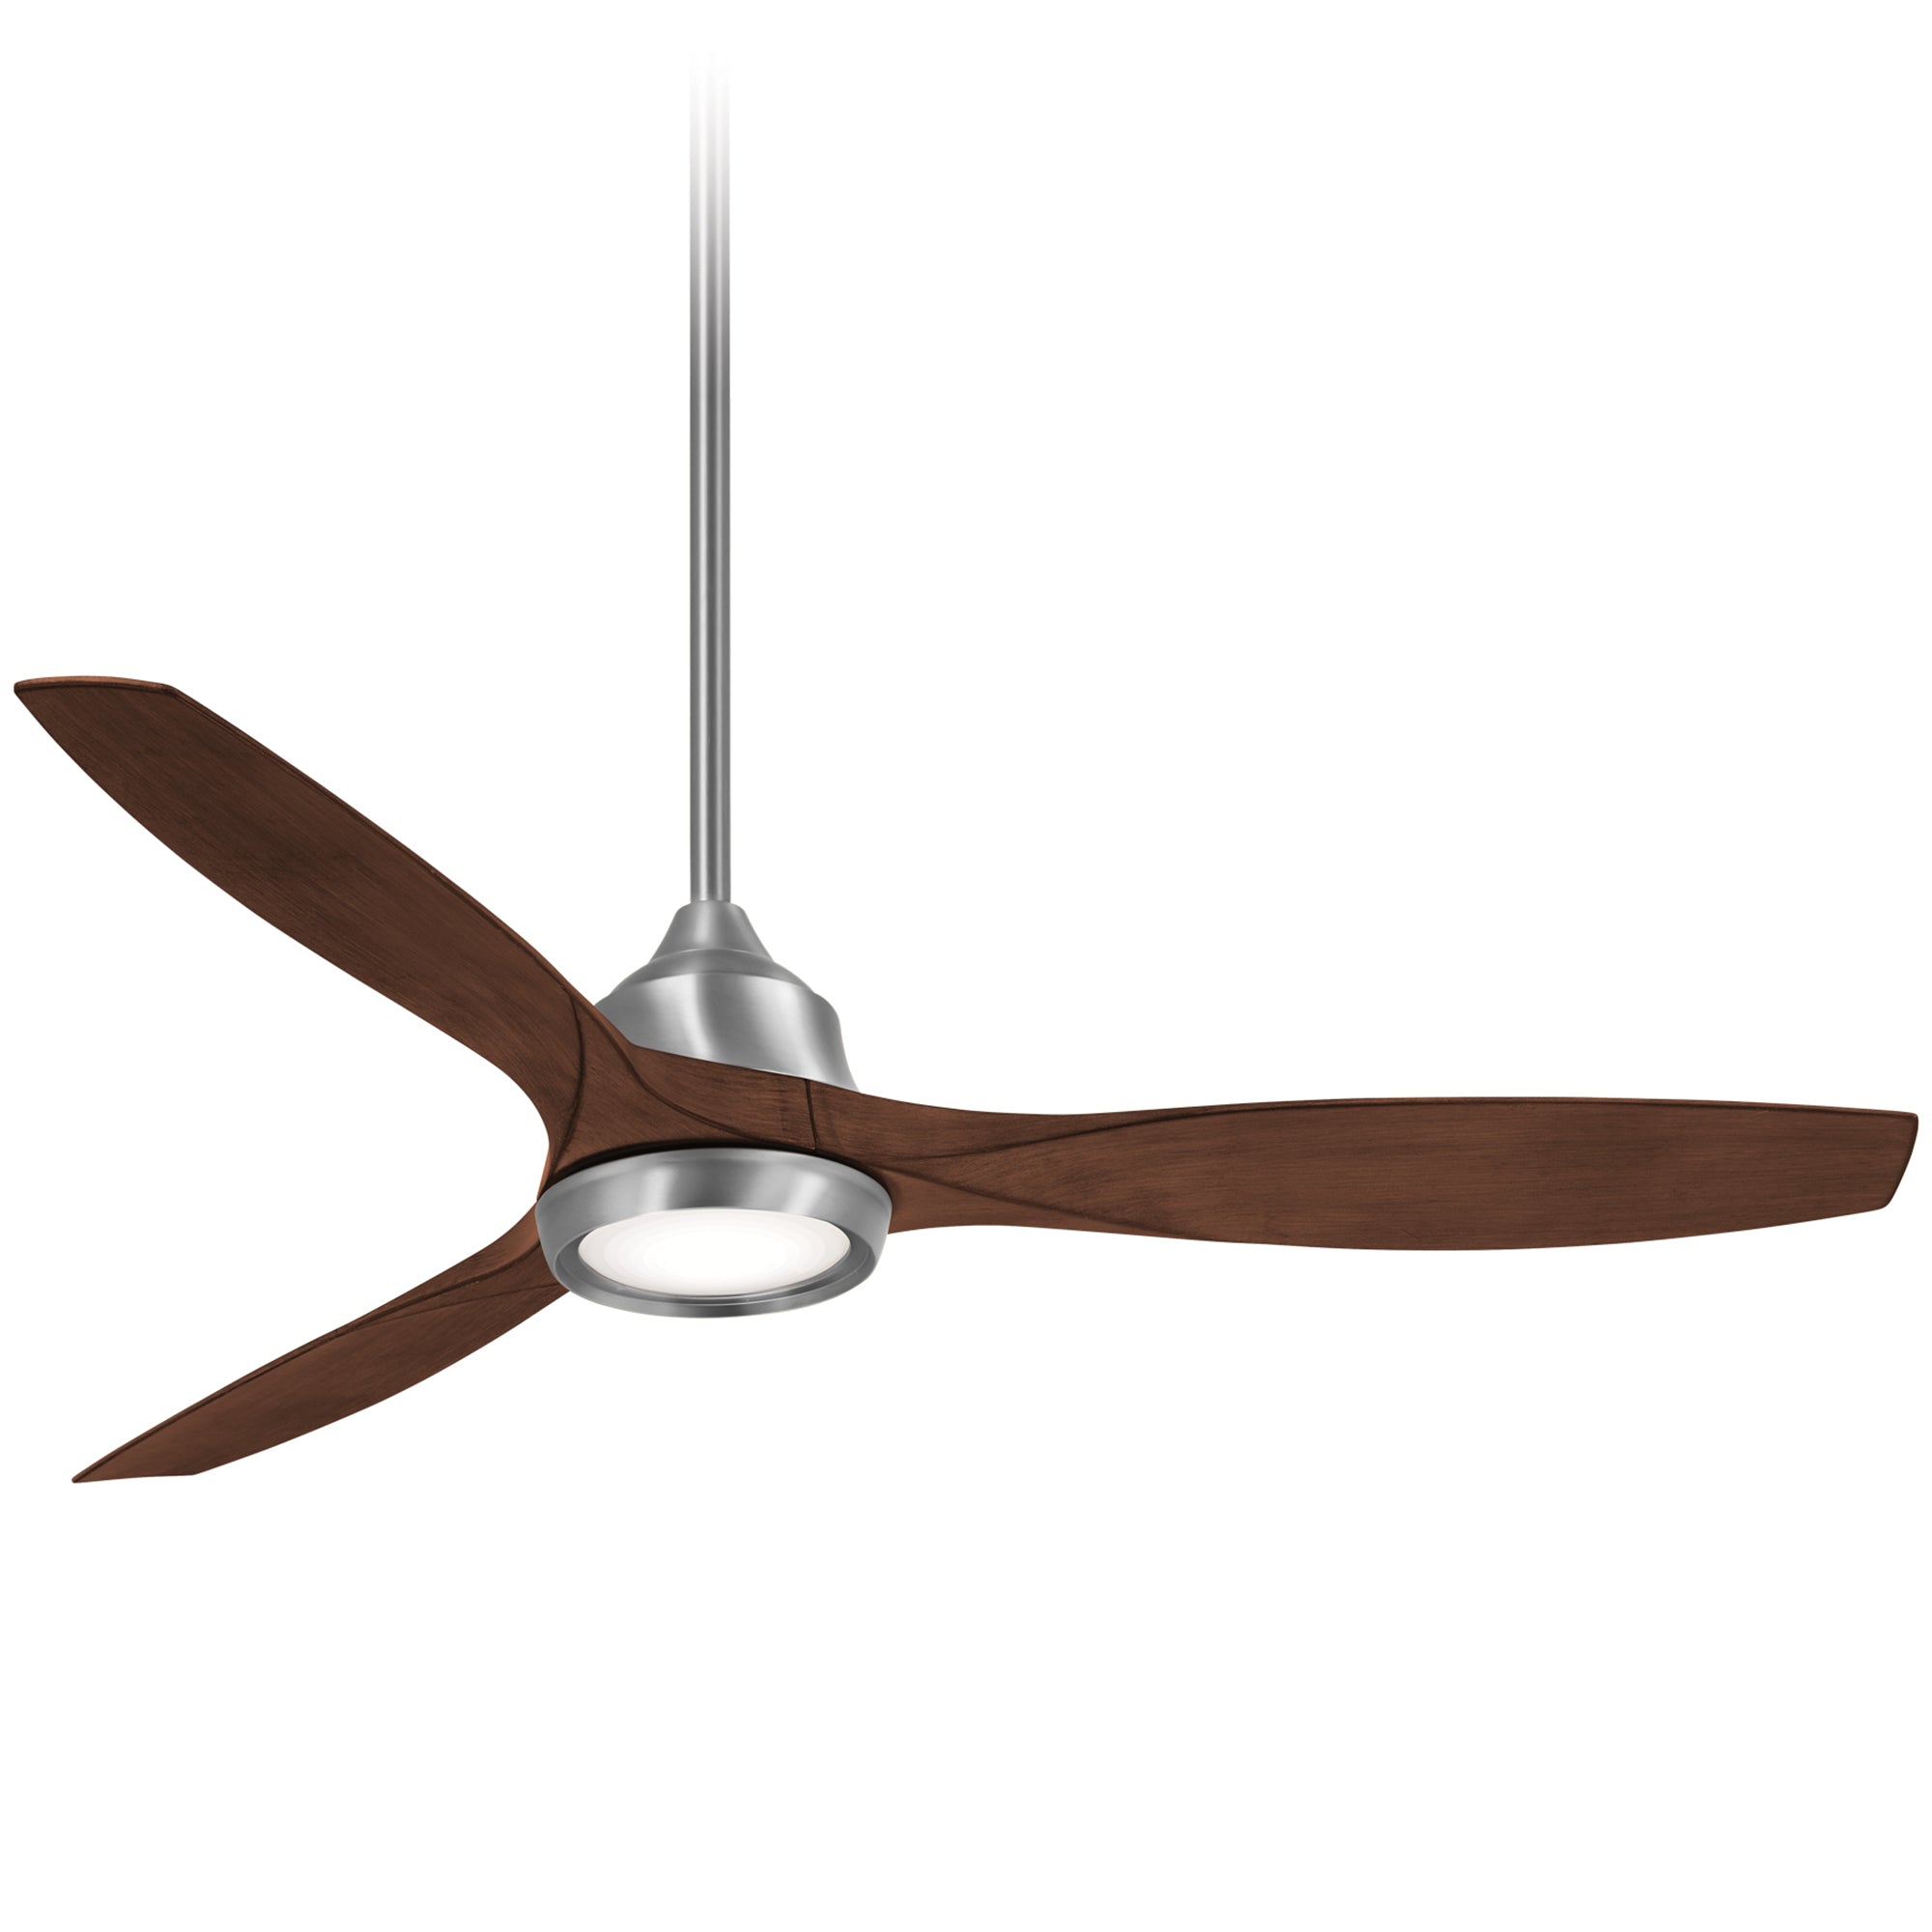 Minka Aire Skyhawk 60" Ceiling Fan with LED Light Kit F749L Ceiling Fan Minka-Aire Brushed Nickel Finish with Hand Carved Wood Dark Maple Blade  